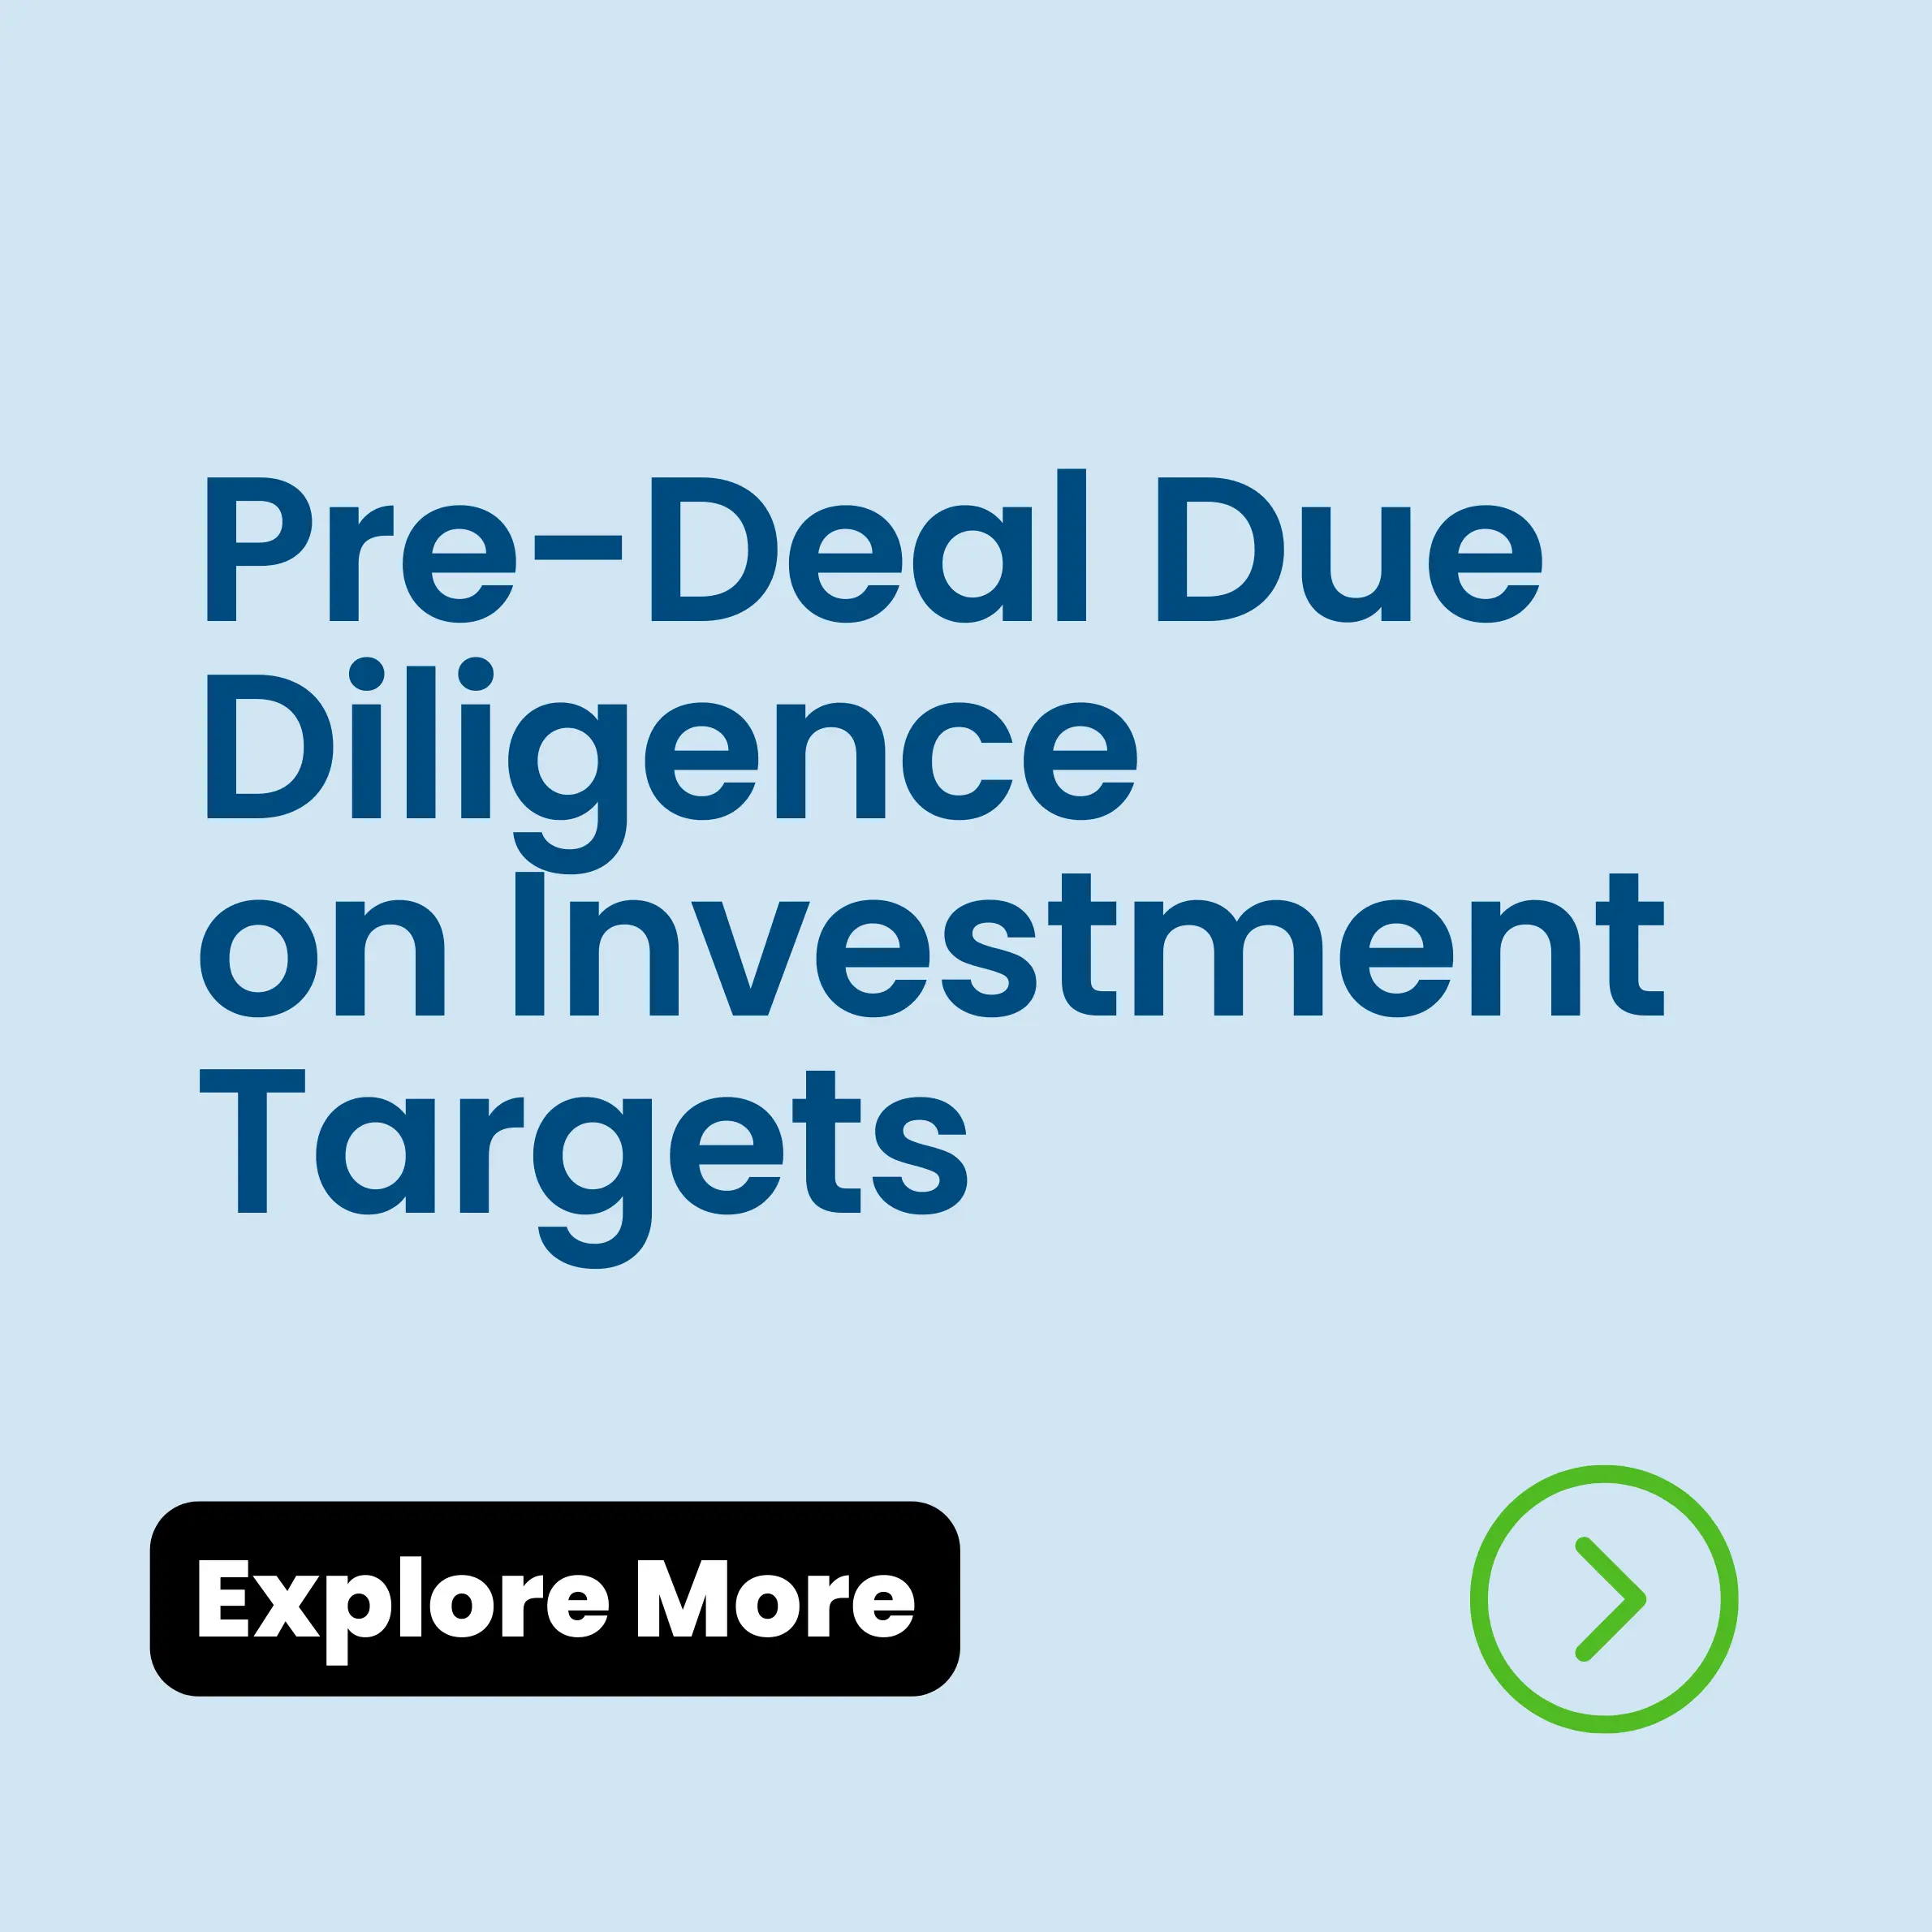 Pre-Deal Due Diligence